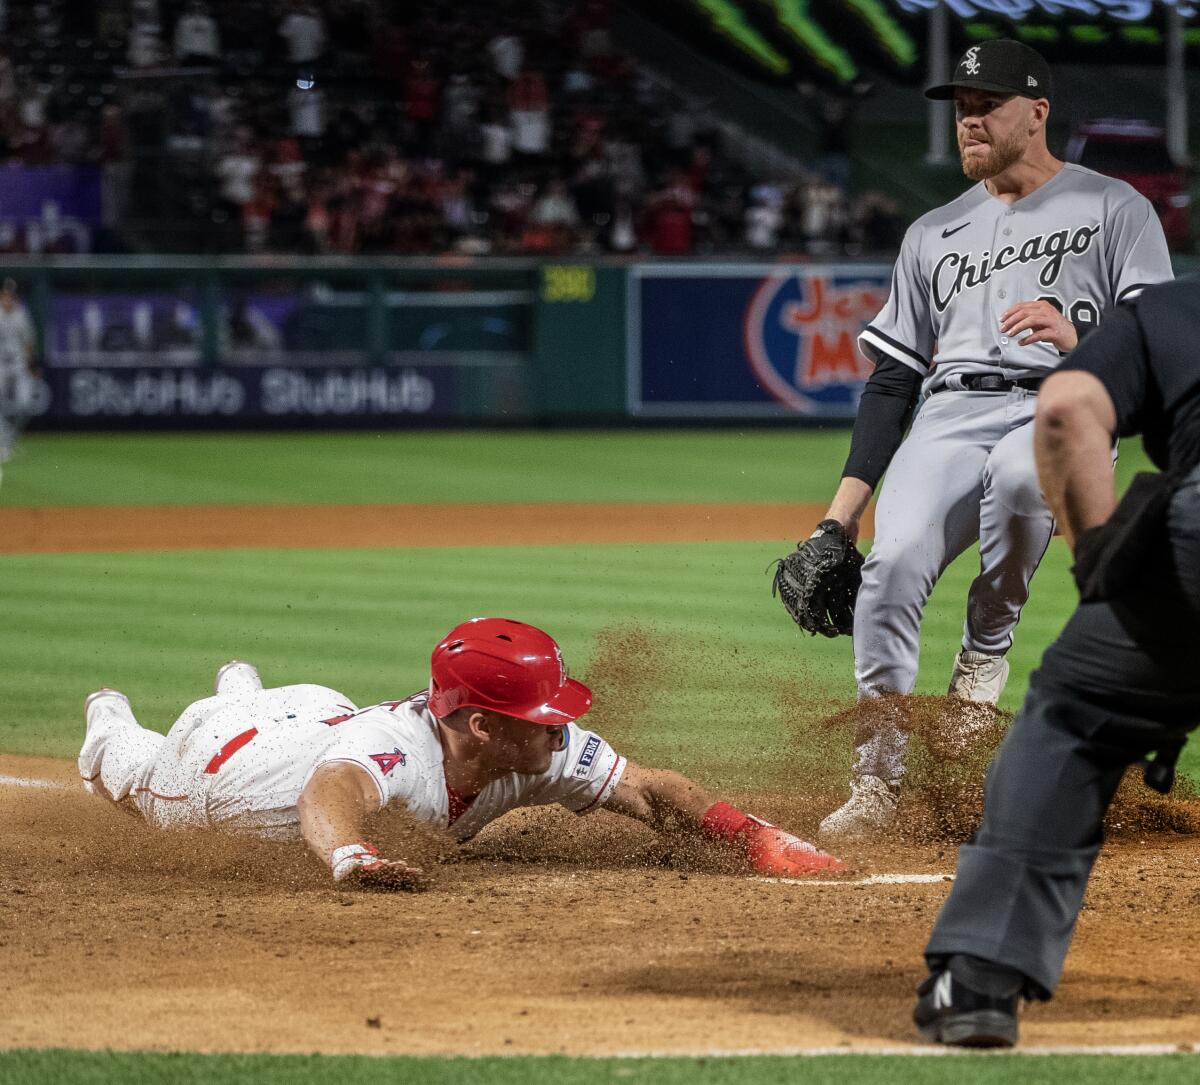 Angels center fielder Mike Trout scores the winning run on a wild pitch.